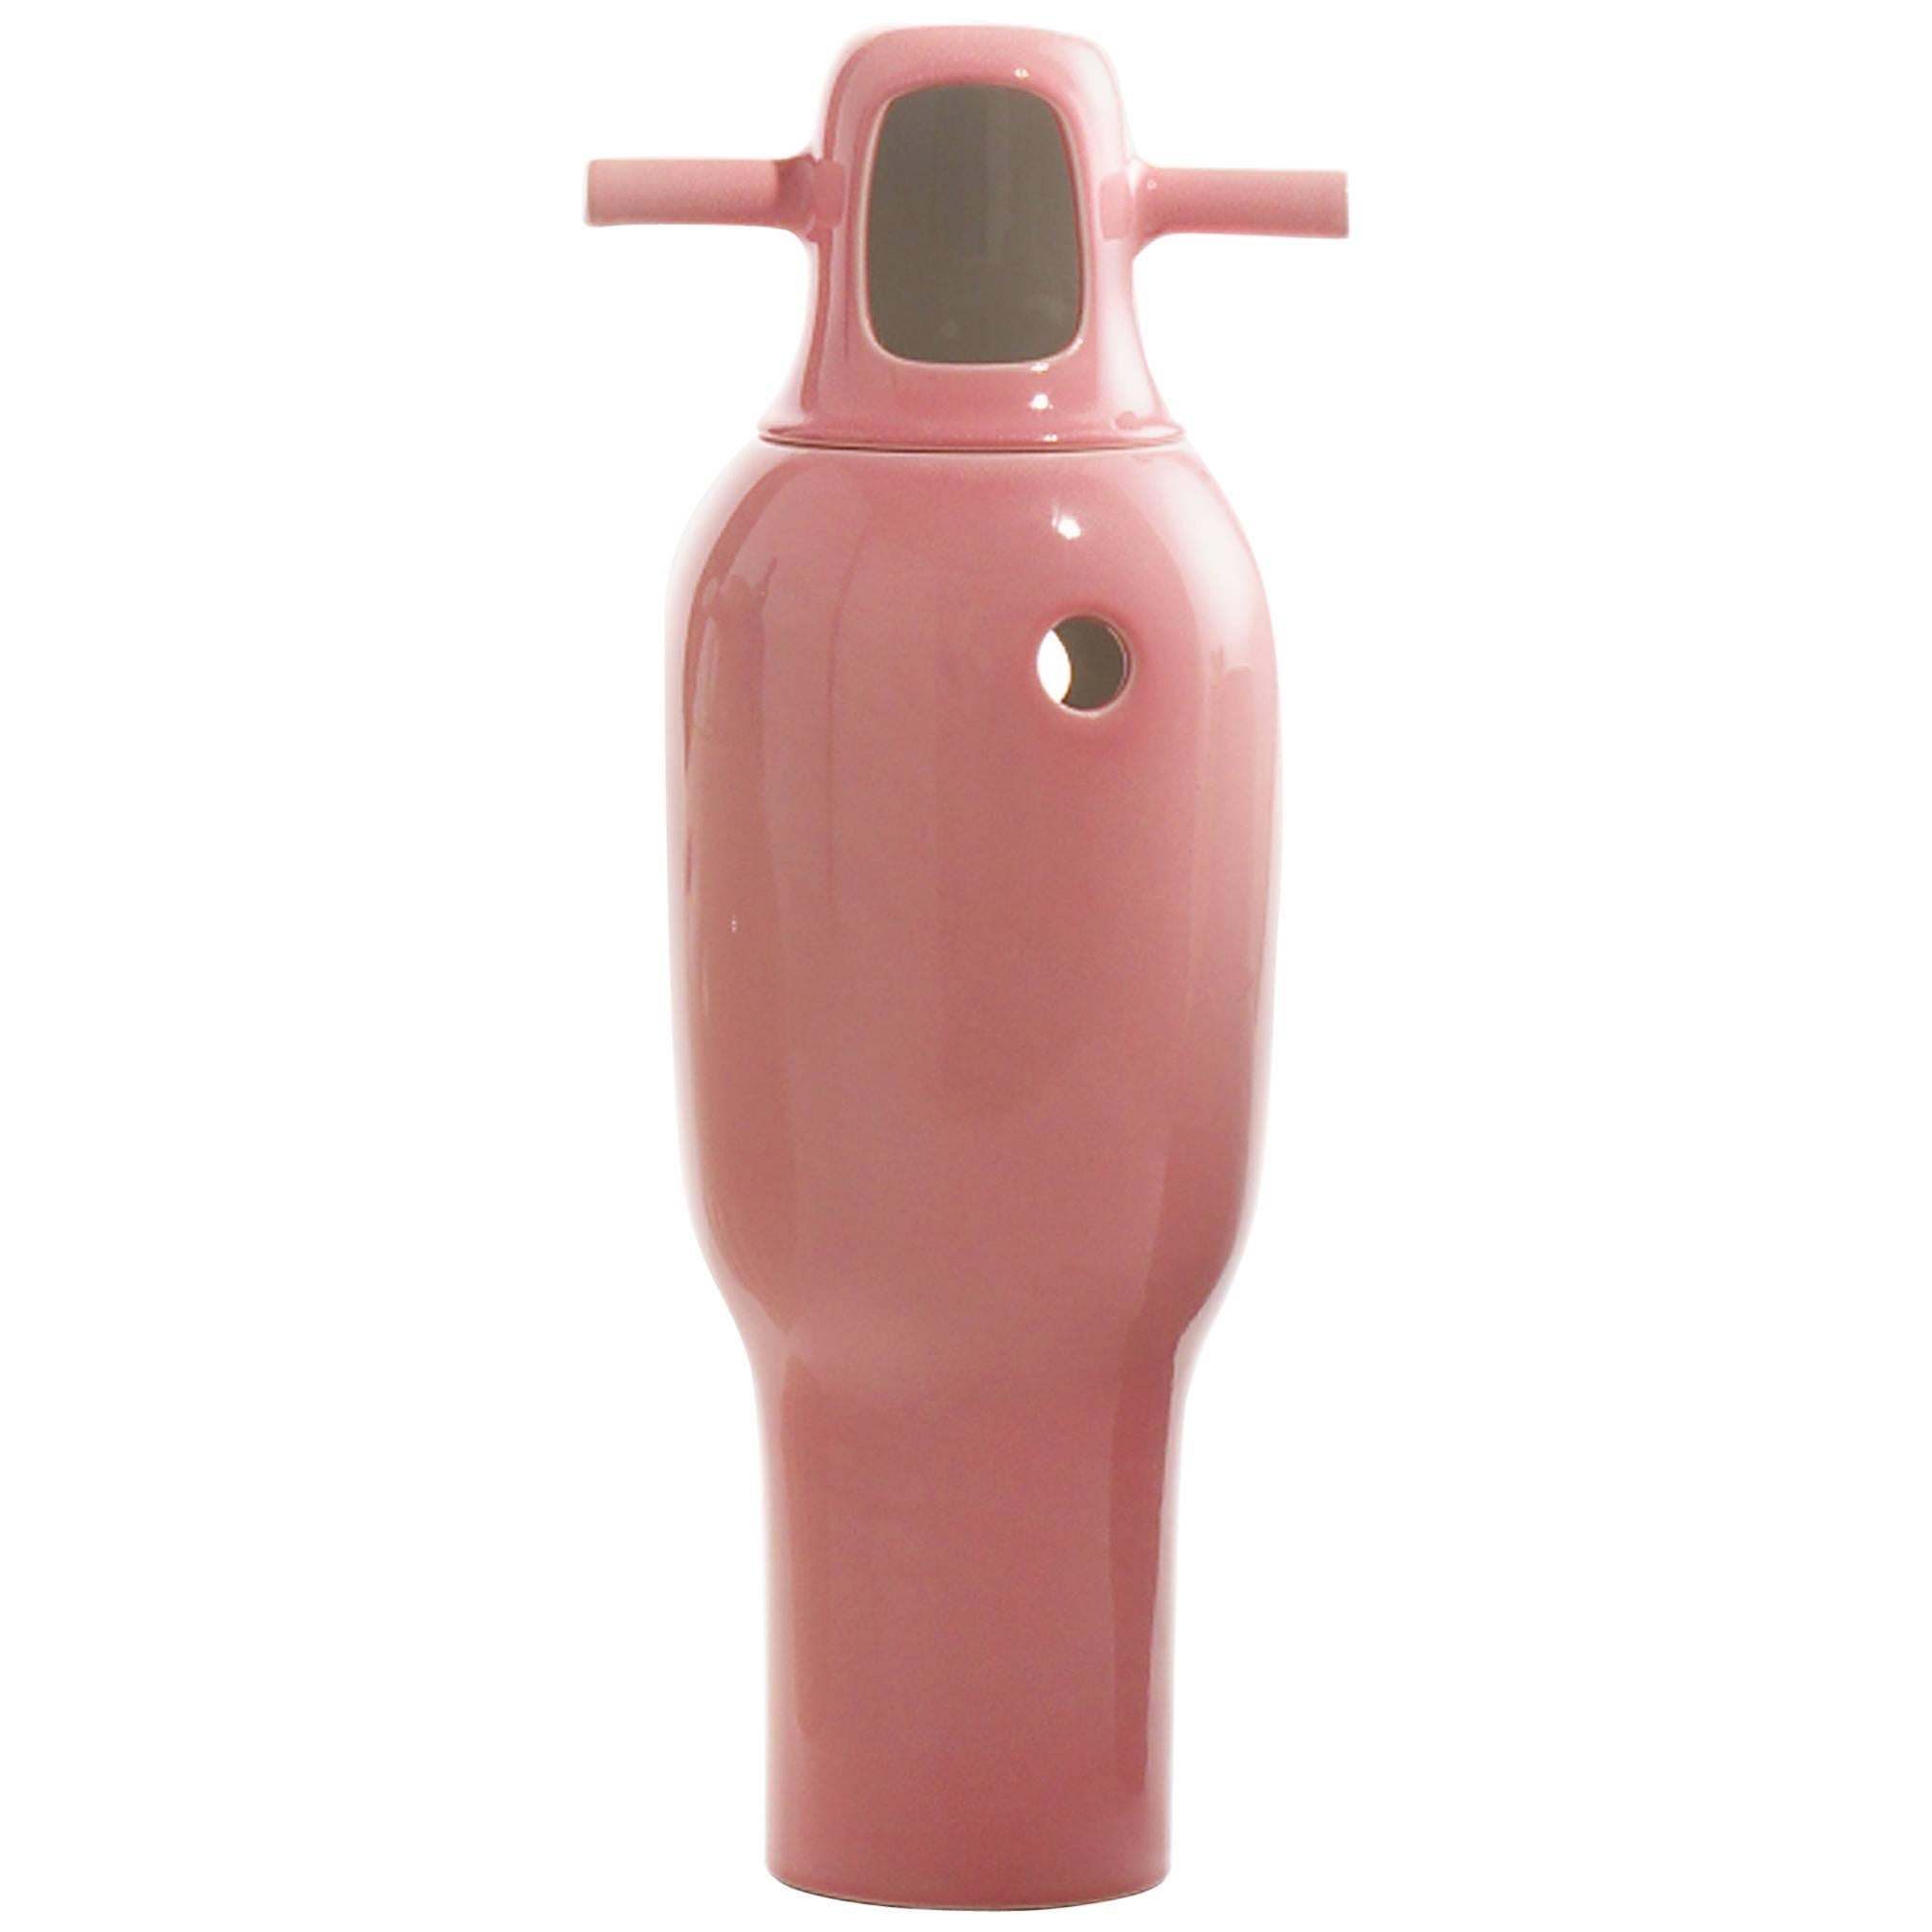 Nº 4 Contemporary Glazed Ceramic Pink Showtime  Vase Collection by Jaime Hayon For Sale